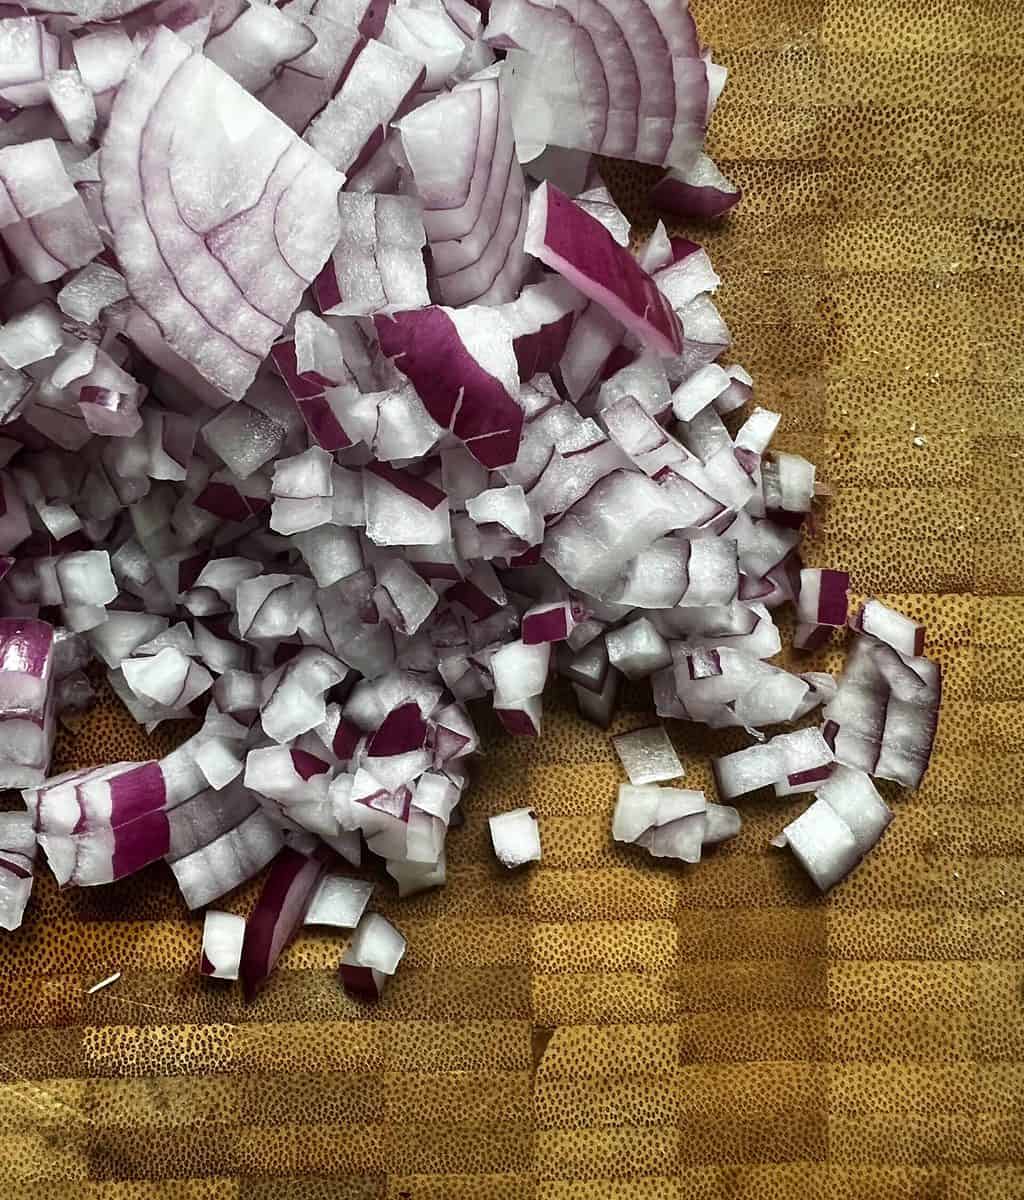 Cutting board full of diced red onion